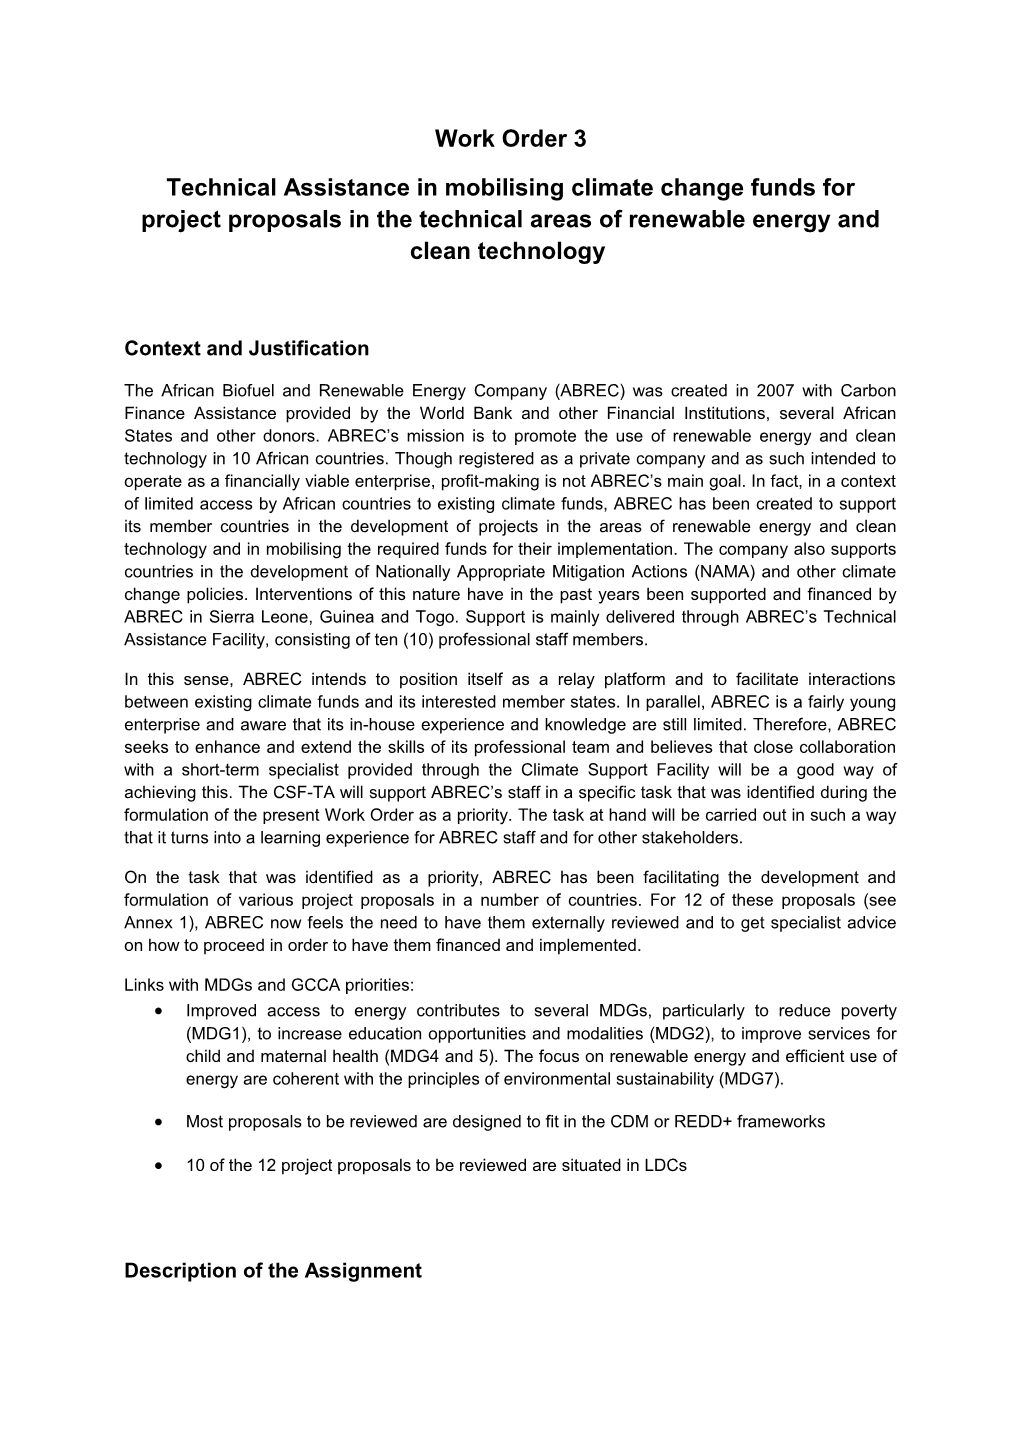 Technical Assistance in Mobilising Climate Change Funds for Project Proposals in the Technical